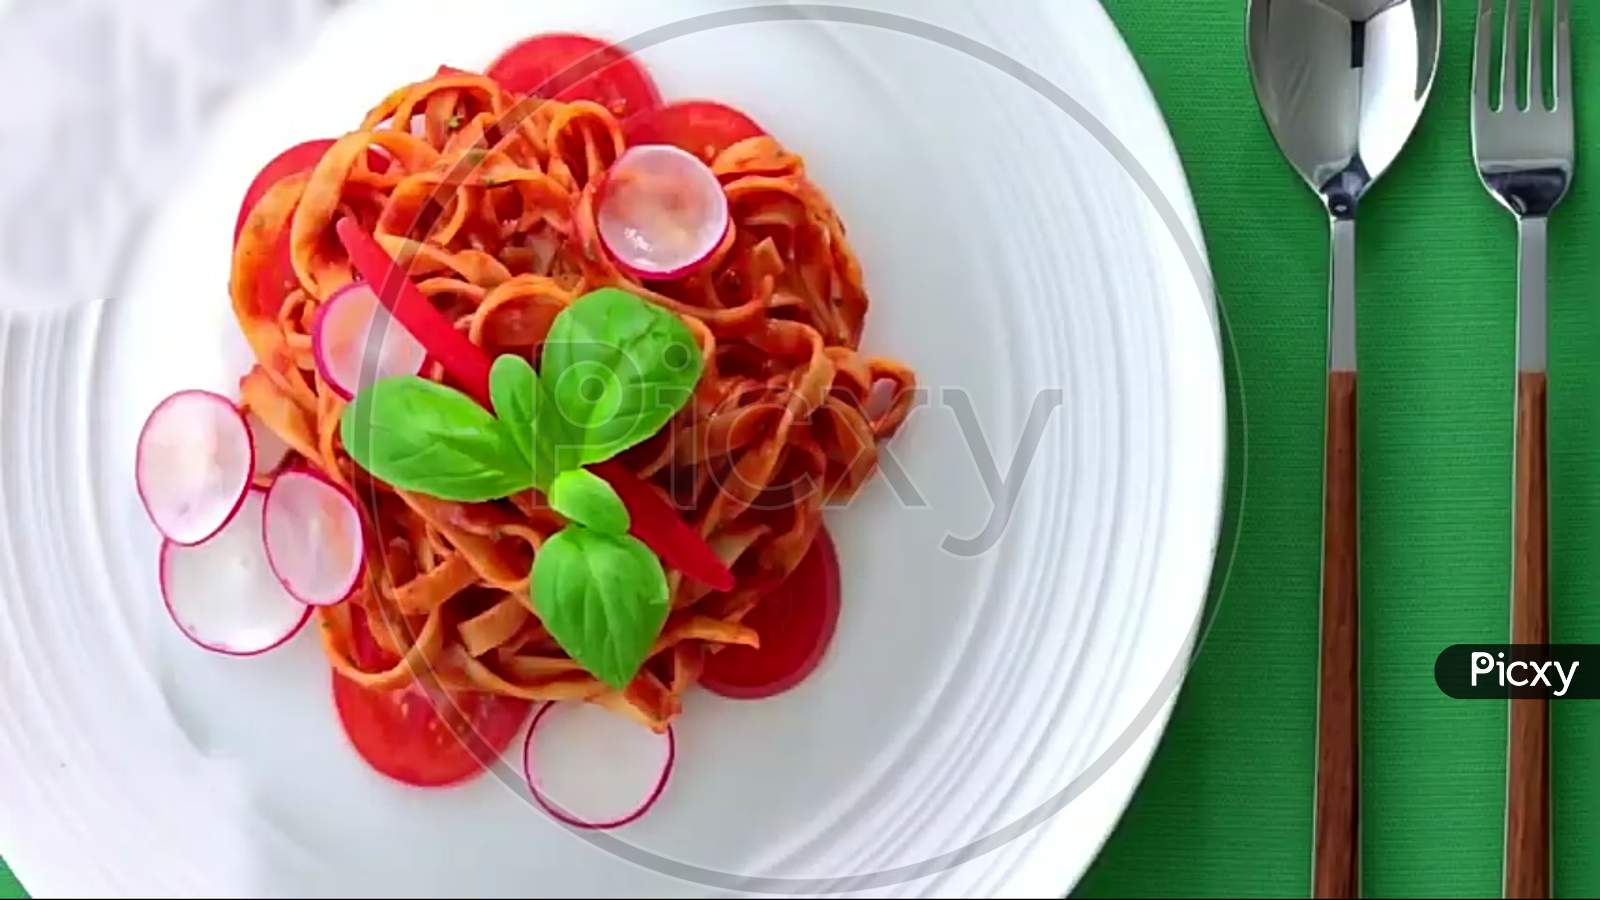 Tomato Salad In dish With spoon